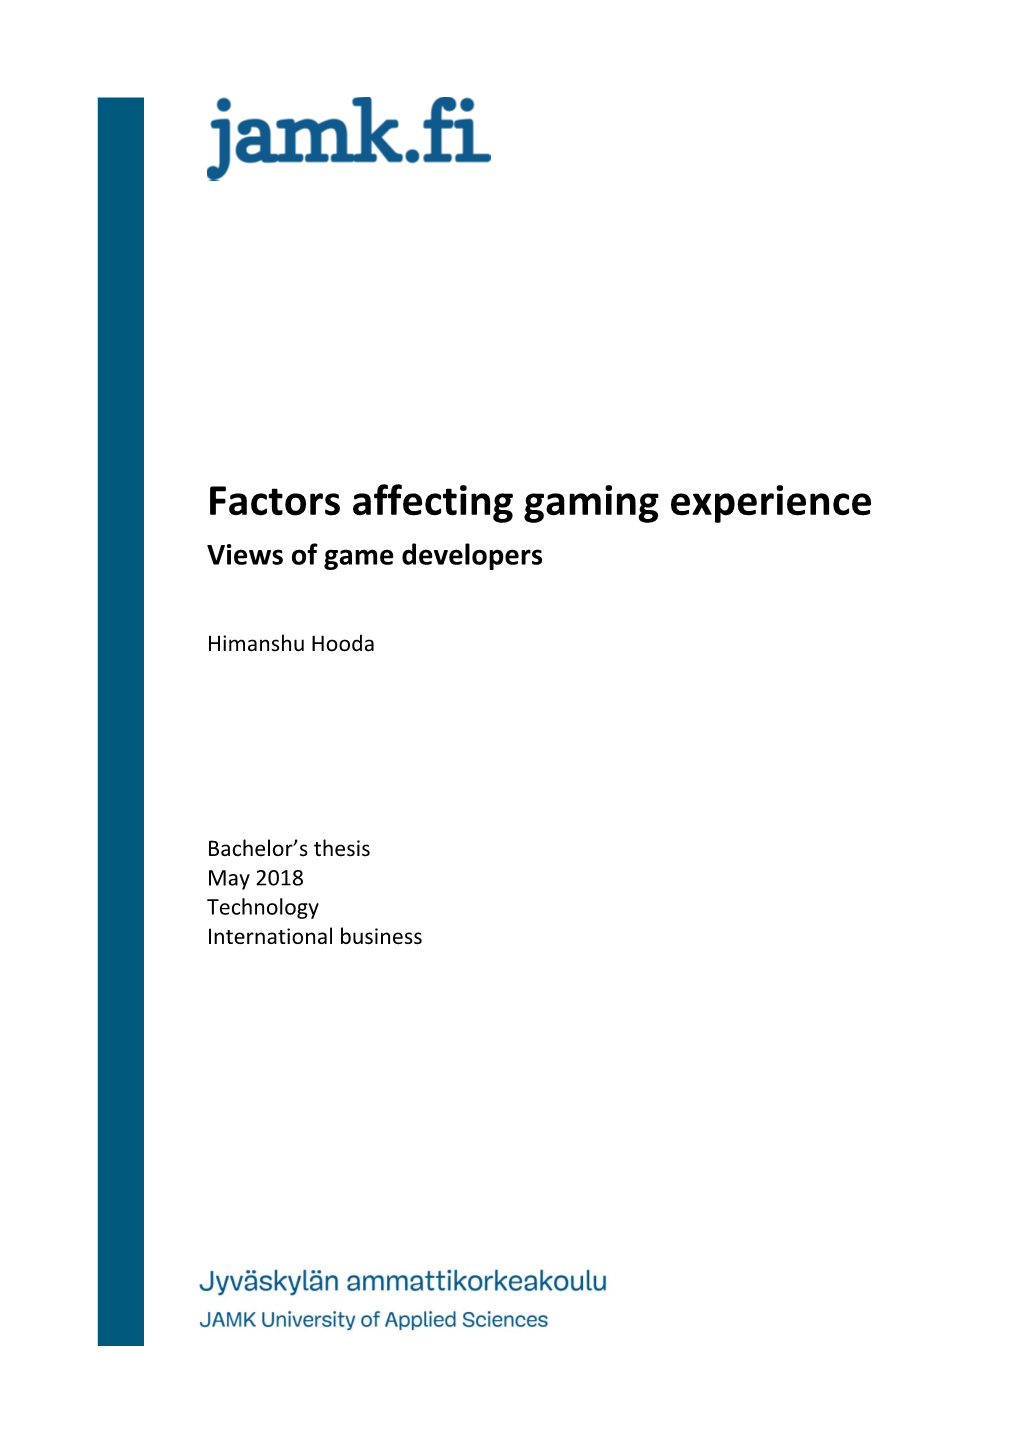 Factors Affecting Gaming Experience Views of Game Developers